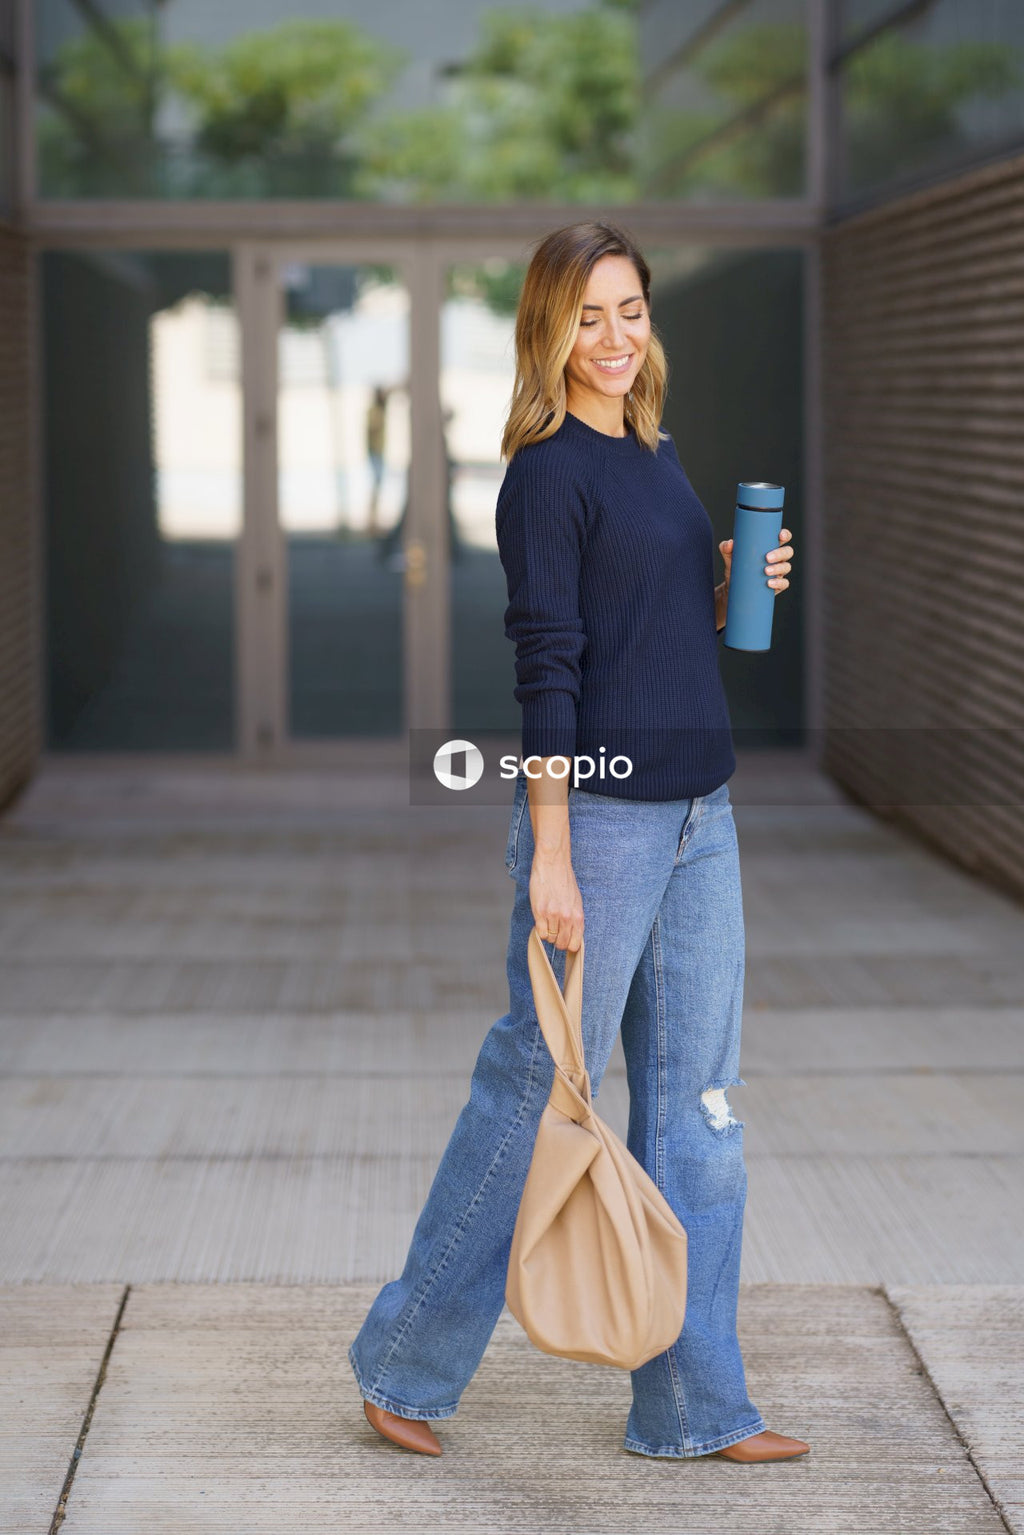 Woman in blue long sleeve shirt and gray pants holding brown leather sling bag